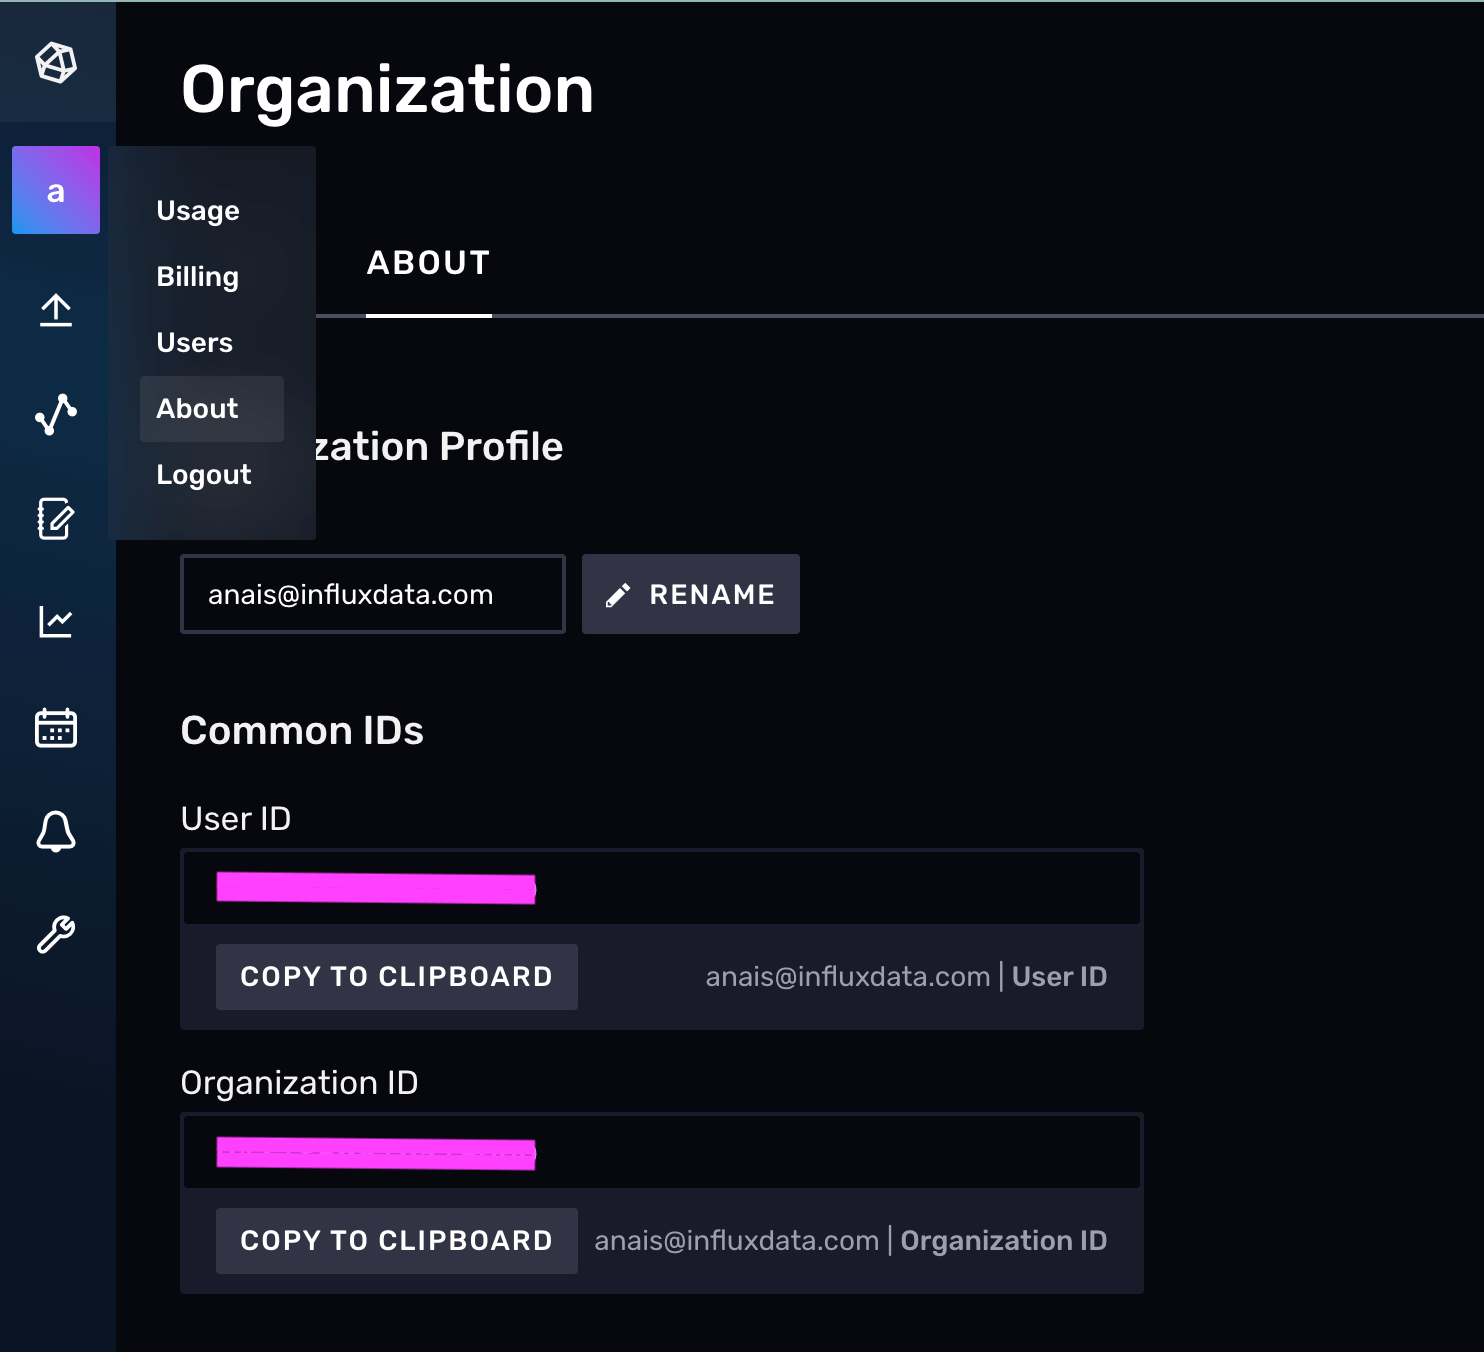 Org and Org ID on the About Me page